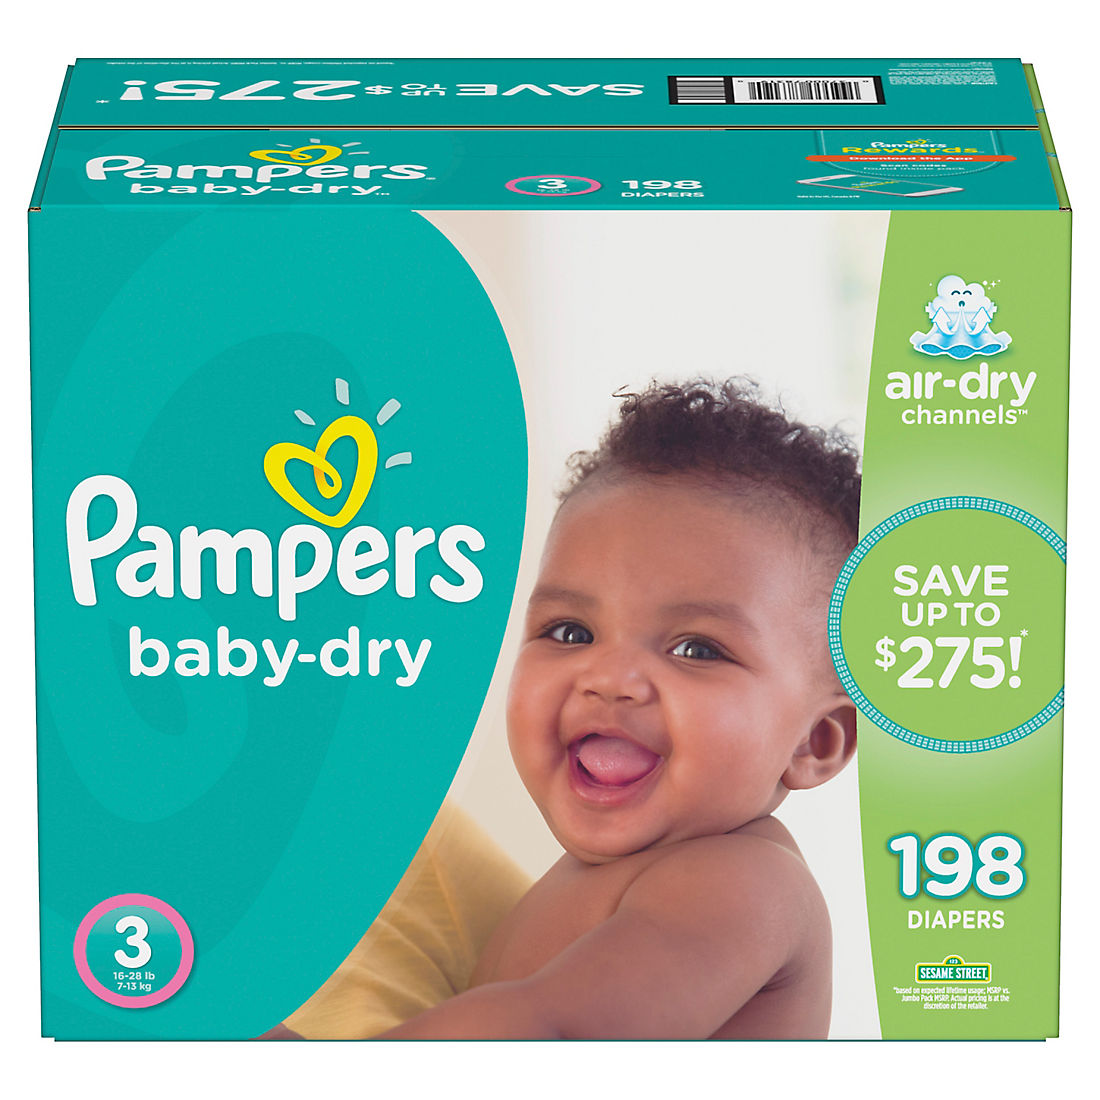 180 Nappy Pants Easy-On for Up to 12 Hours Monthly Pack Pampers Baby-Dry Size 3 